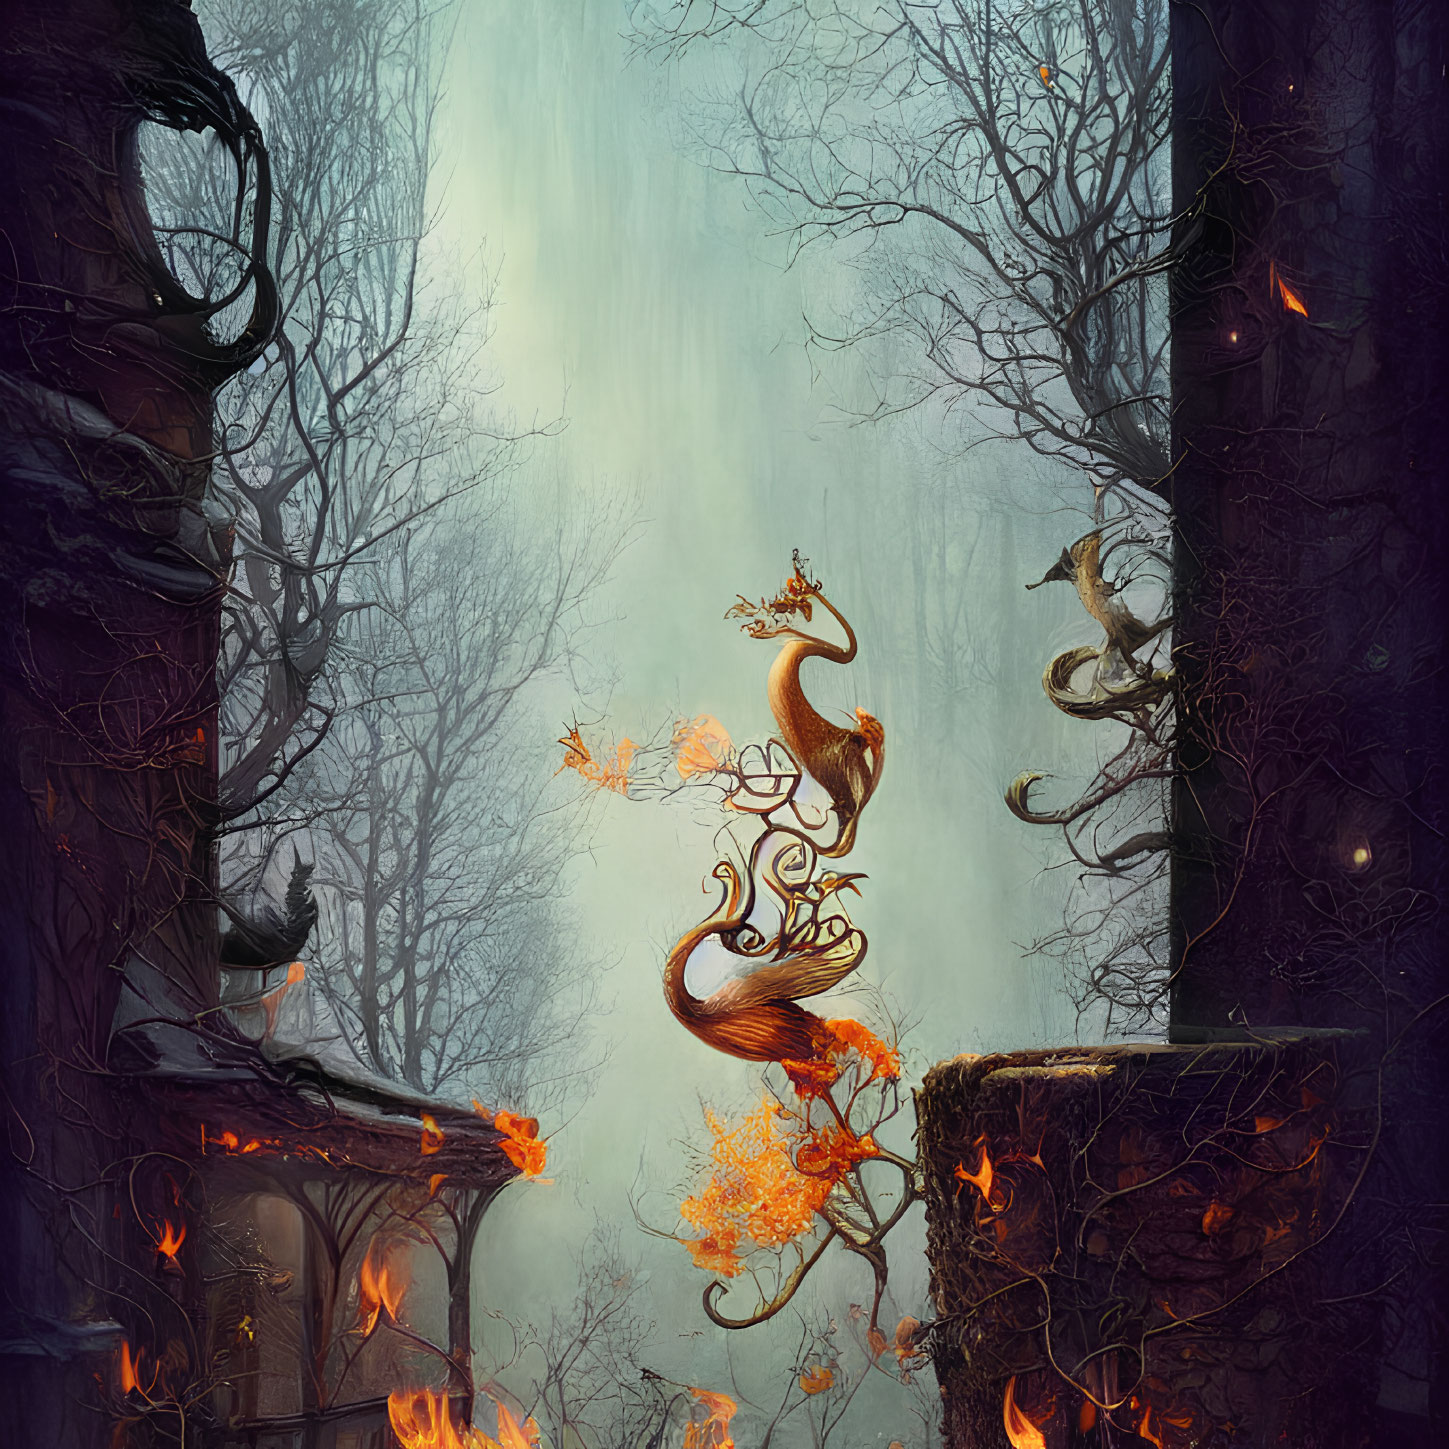 Enchanting forest scene with fiery leaves, glowing tree, and ancient ruins